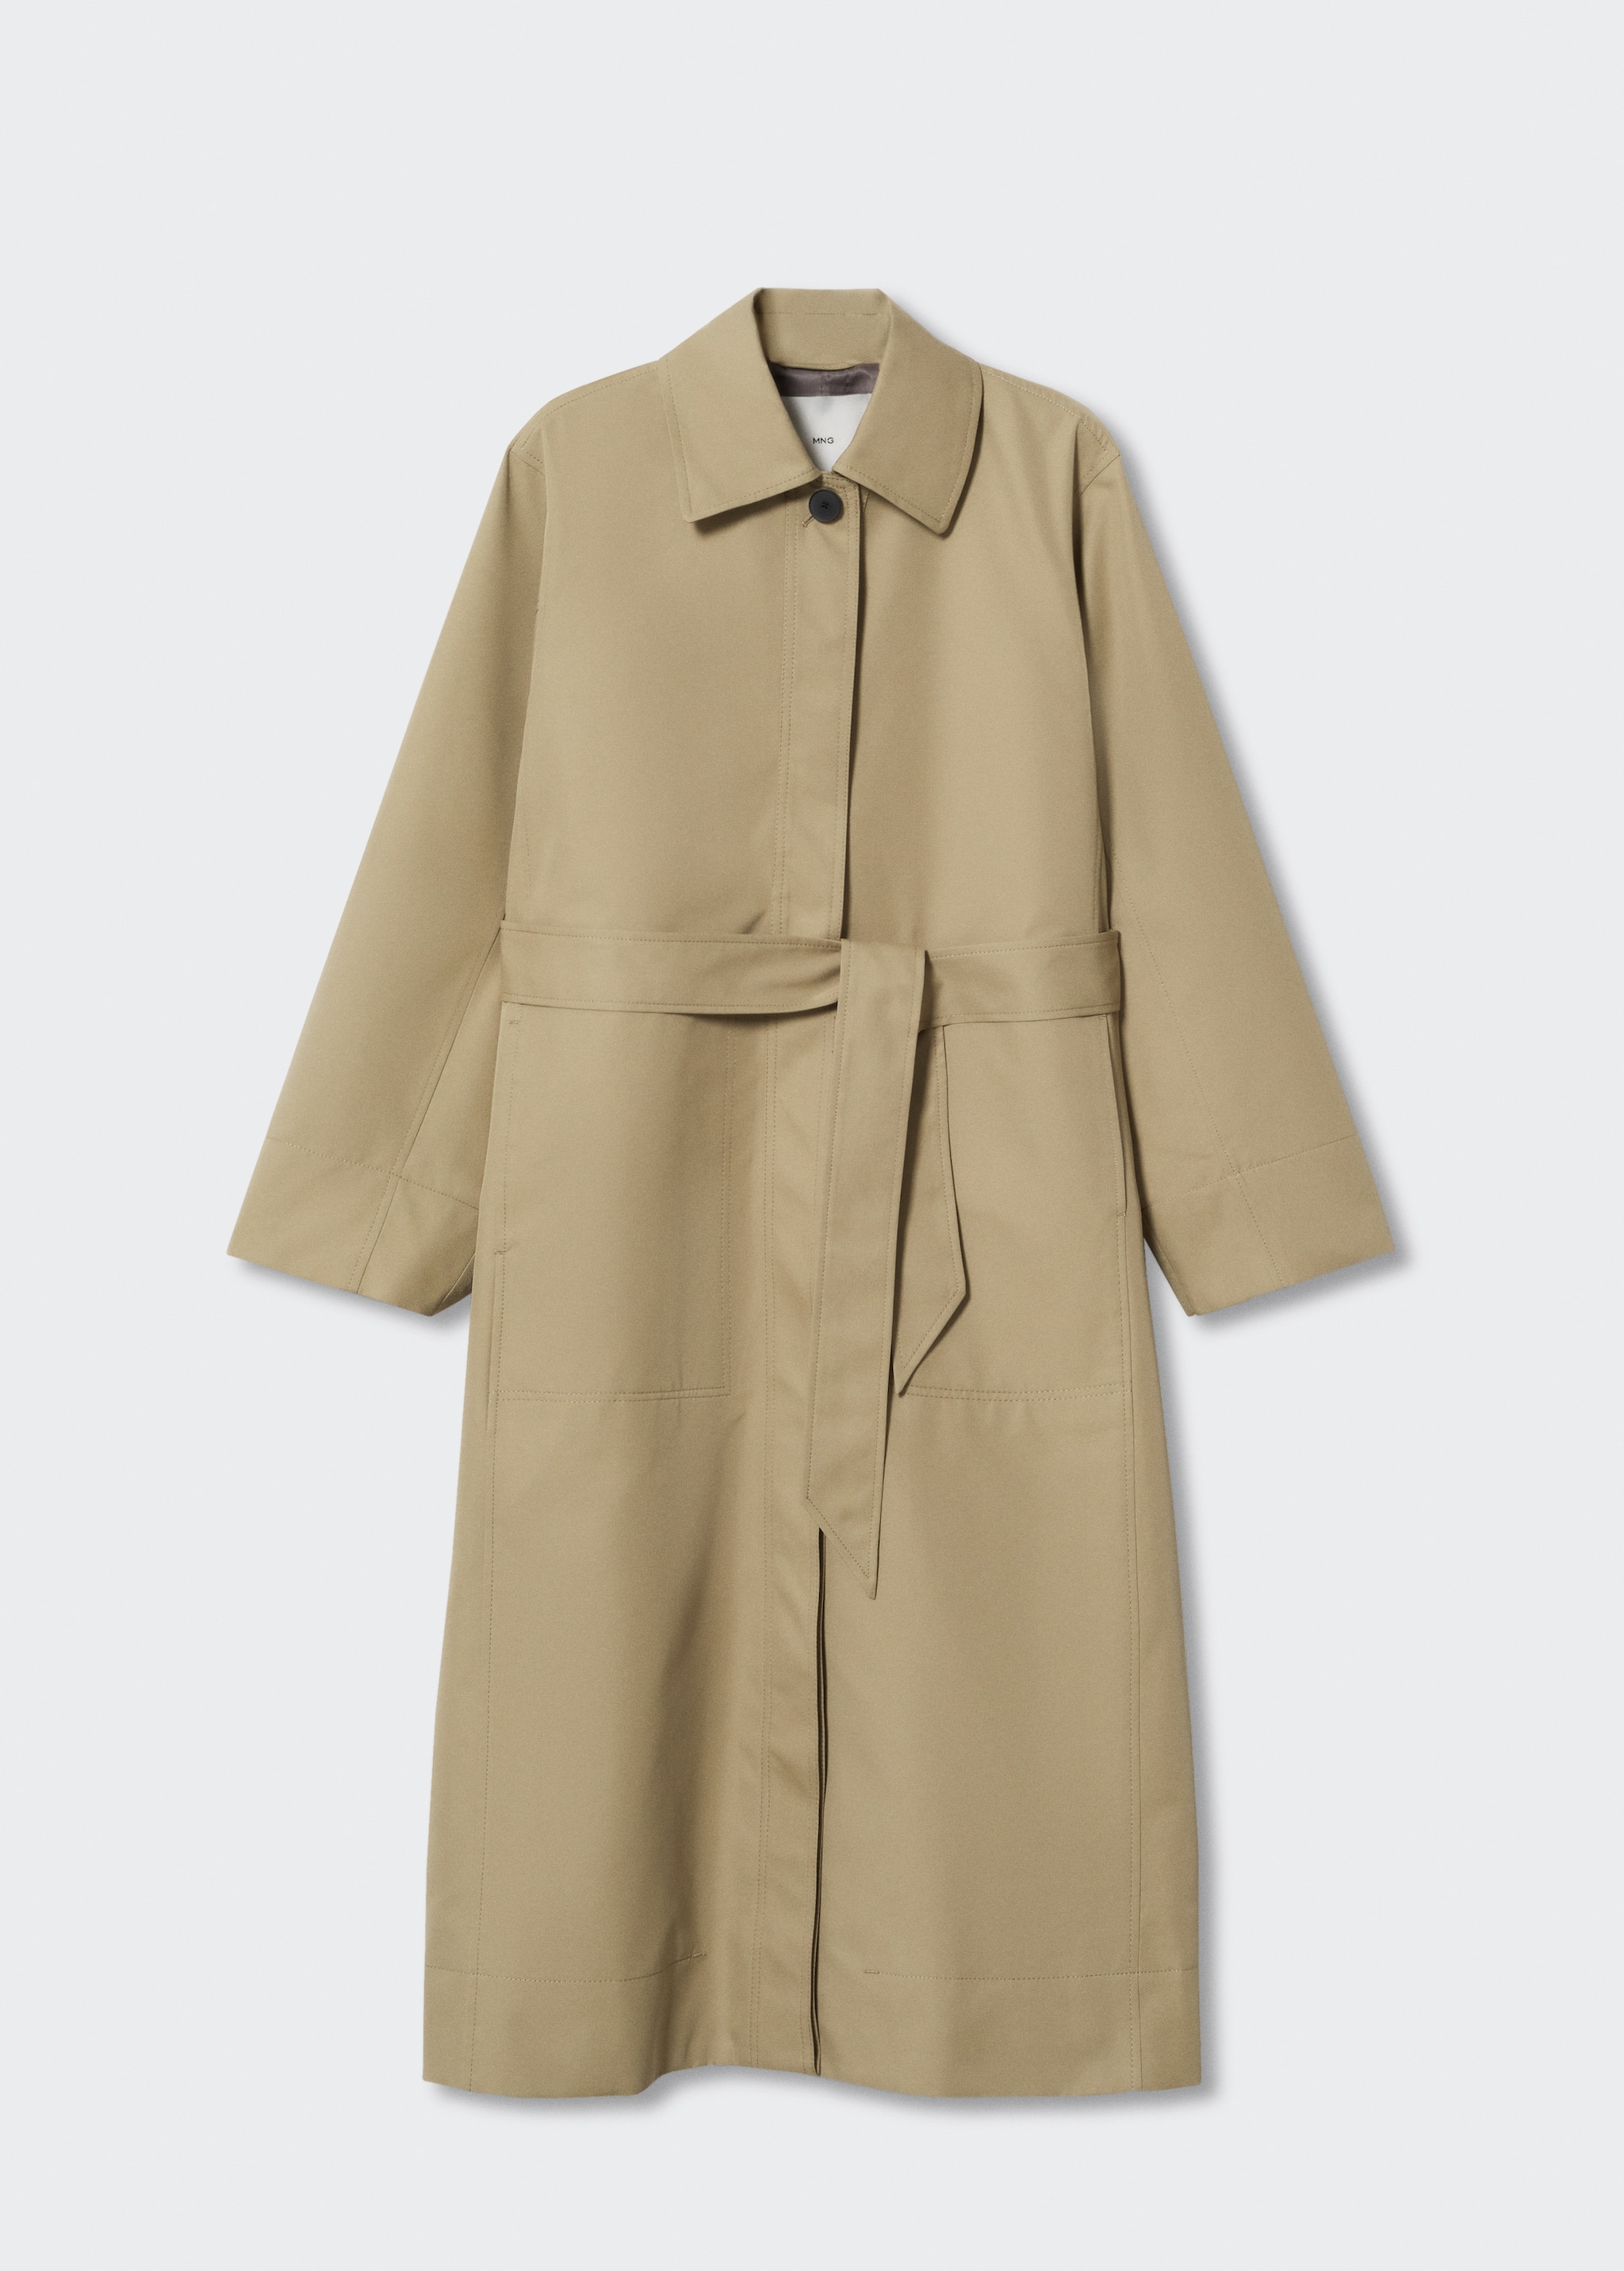 Oversized cotton trench - Article without model